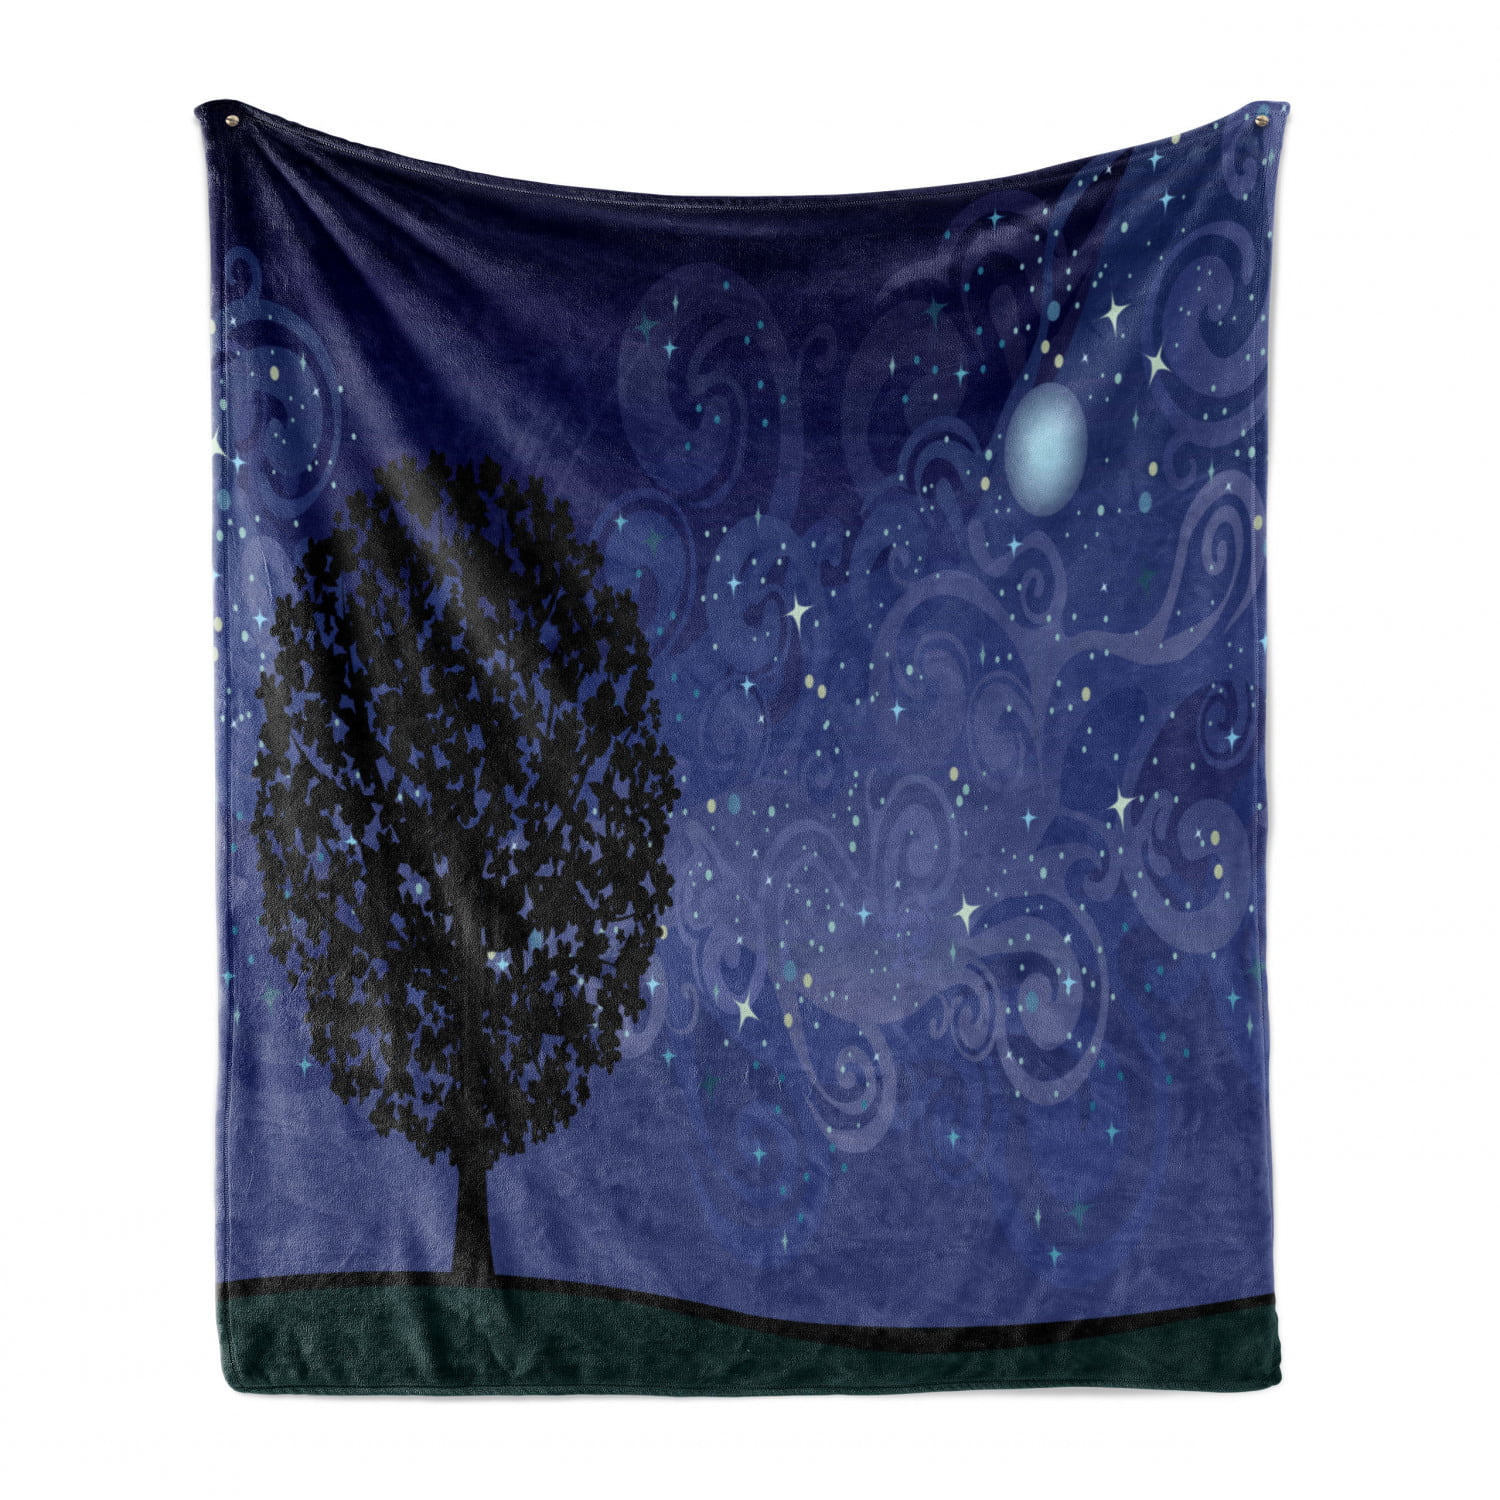 Cozy Plush for Indoor and Outdoor Use Charcoal Grey Indigo Ambesonne Starry Night Soft Flannel Fleece Throw Blanket 50 x 70 Tree on a Hill with Star Filled Sky and Moon Milky Way Galaxy 